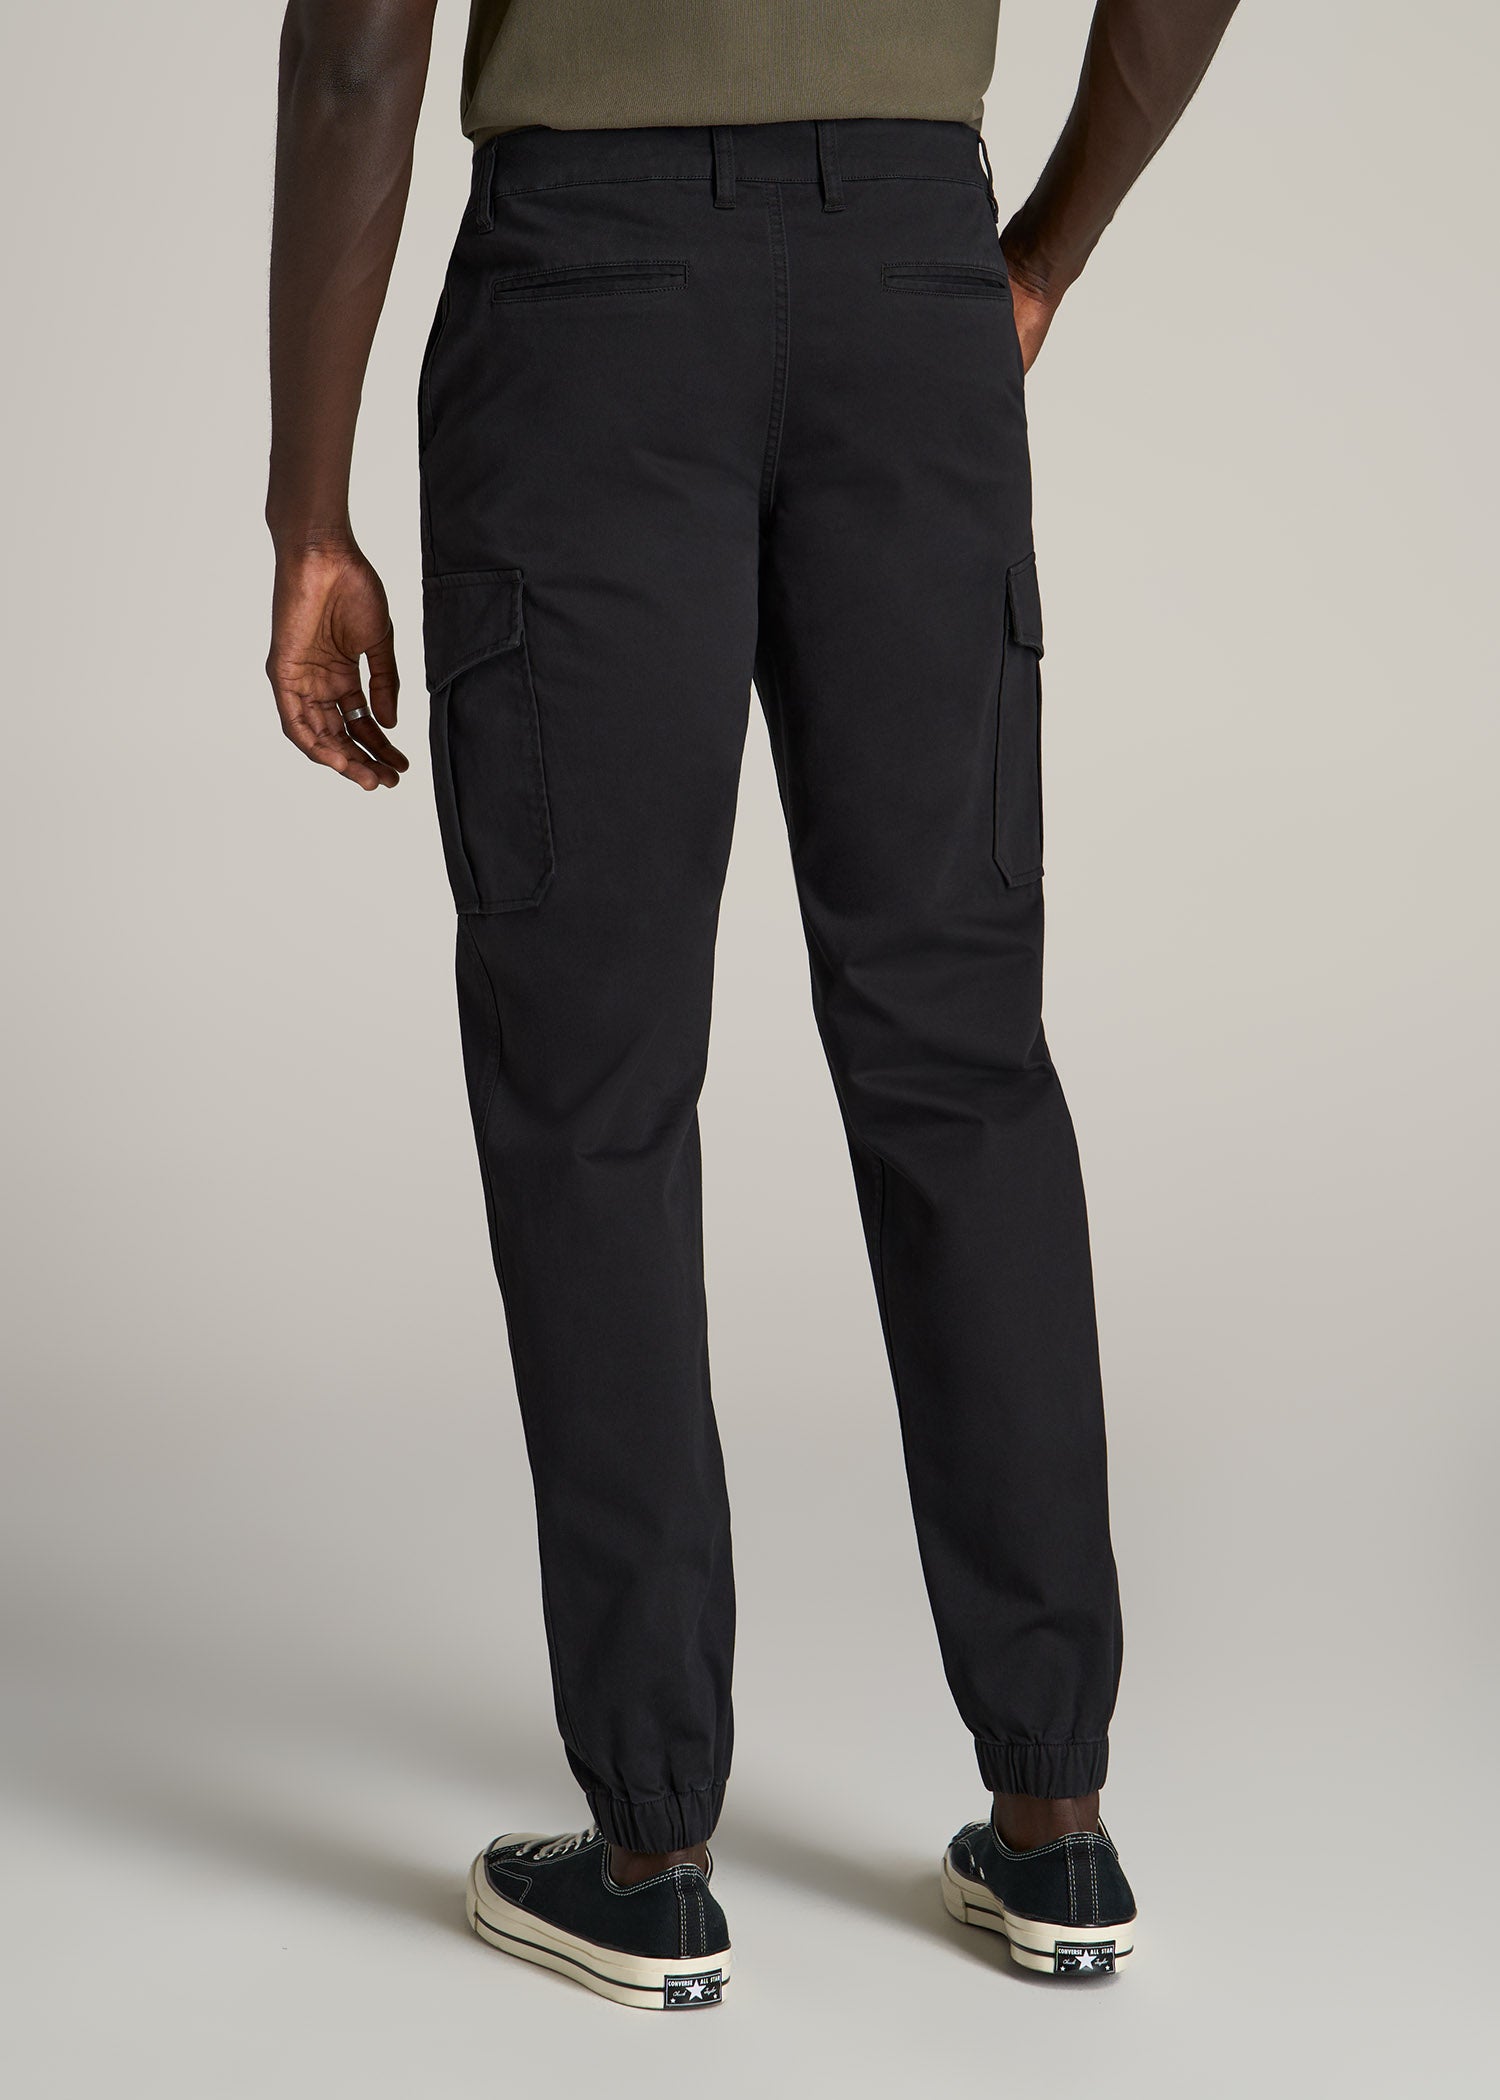 Buy Black Men Pant Cotton Handloom for Best Price, Reviews, Free Shipping